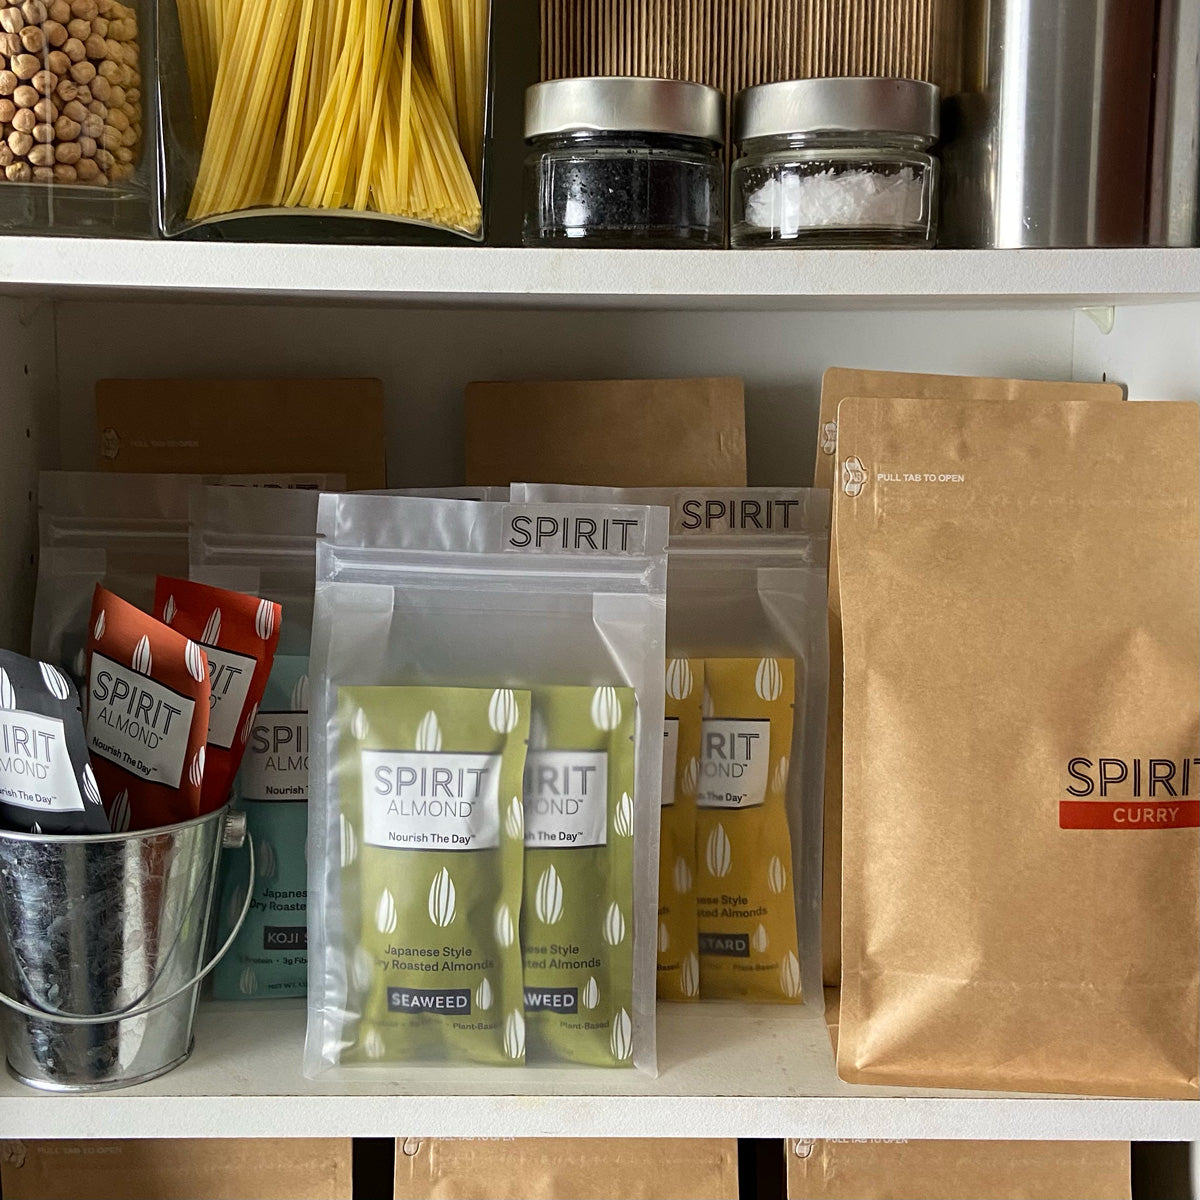 SPIRIT Almond packages inside a kitchen pantry